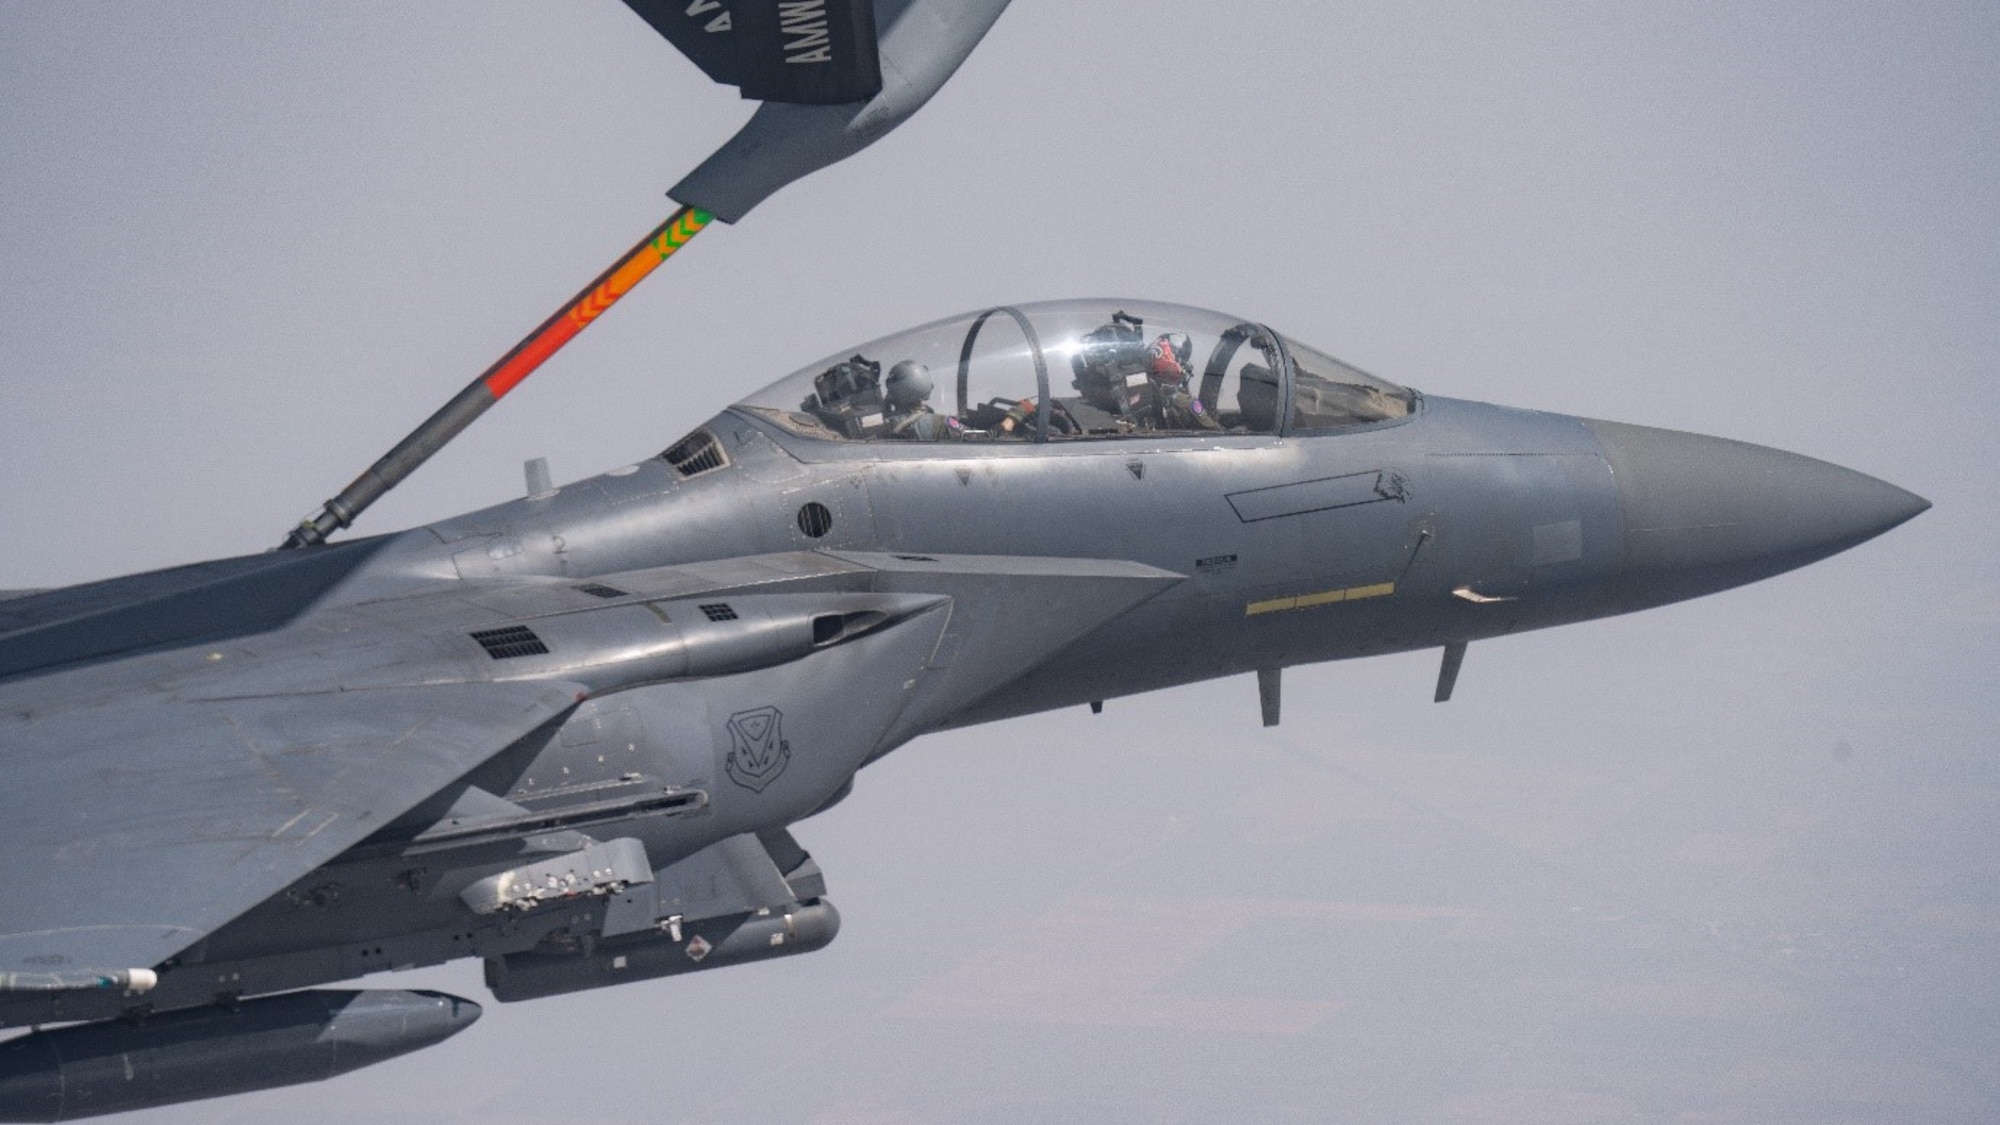 An F-15E Strike Eagle from the 389th Fighter Squadron refuels with a KC-135 Stratotanker over Colorado.(U.S. Air Force photo by Maj. Mark Calendine)